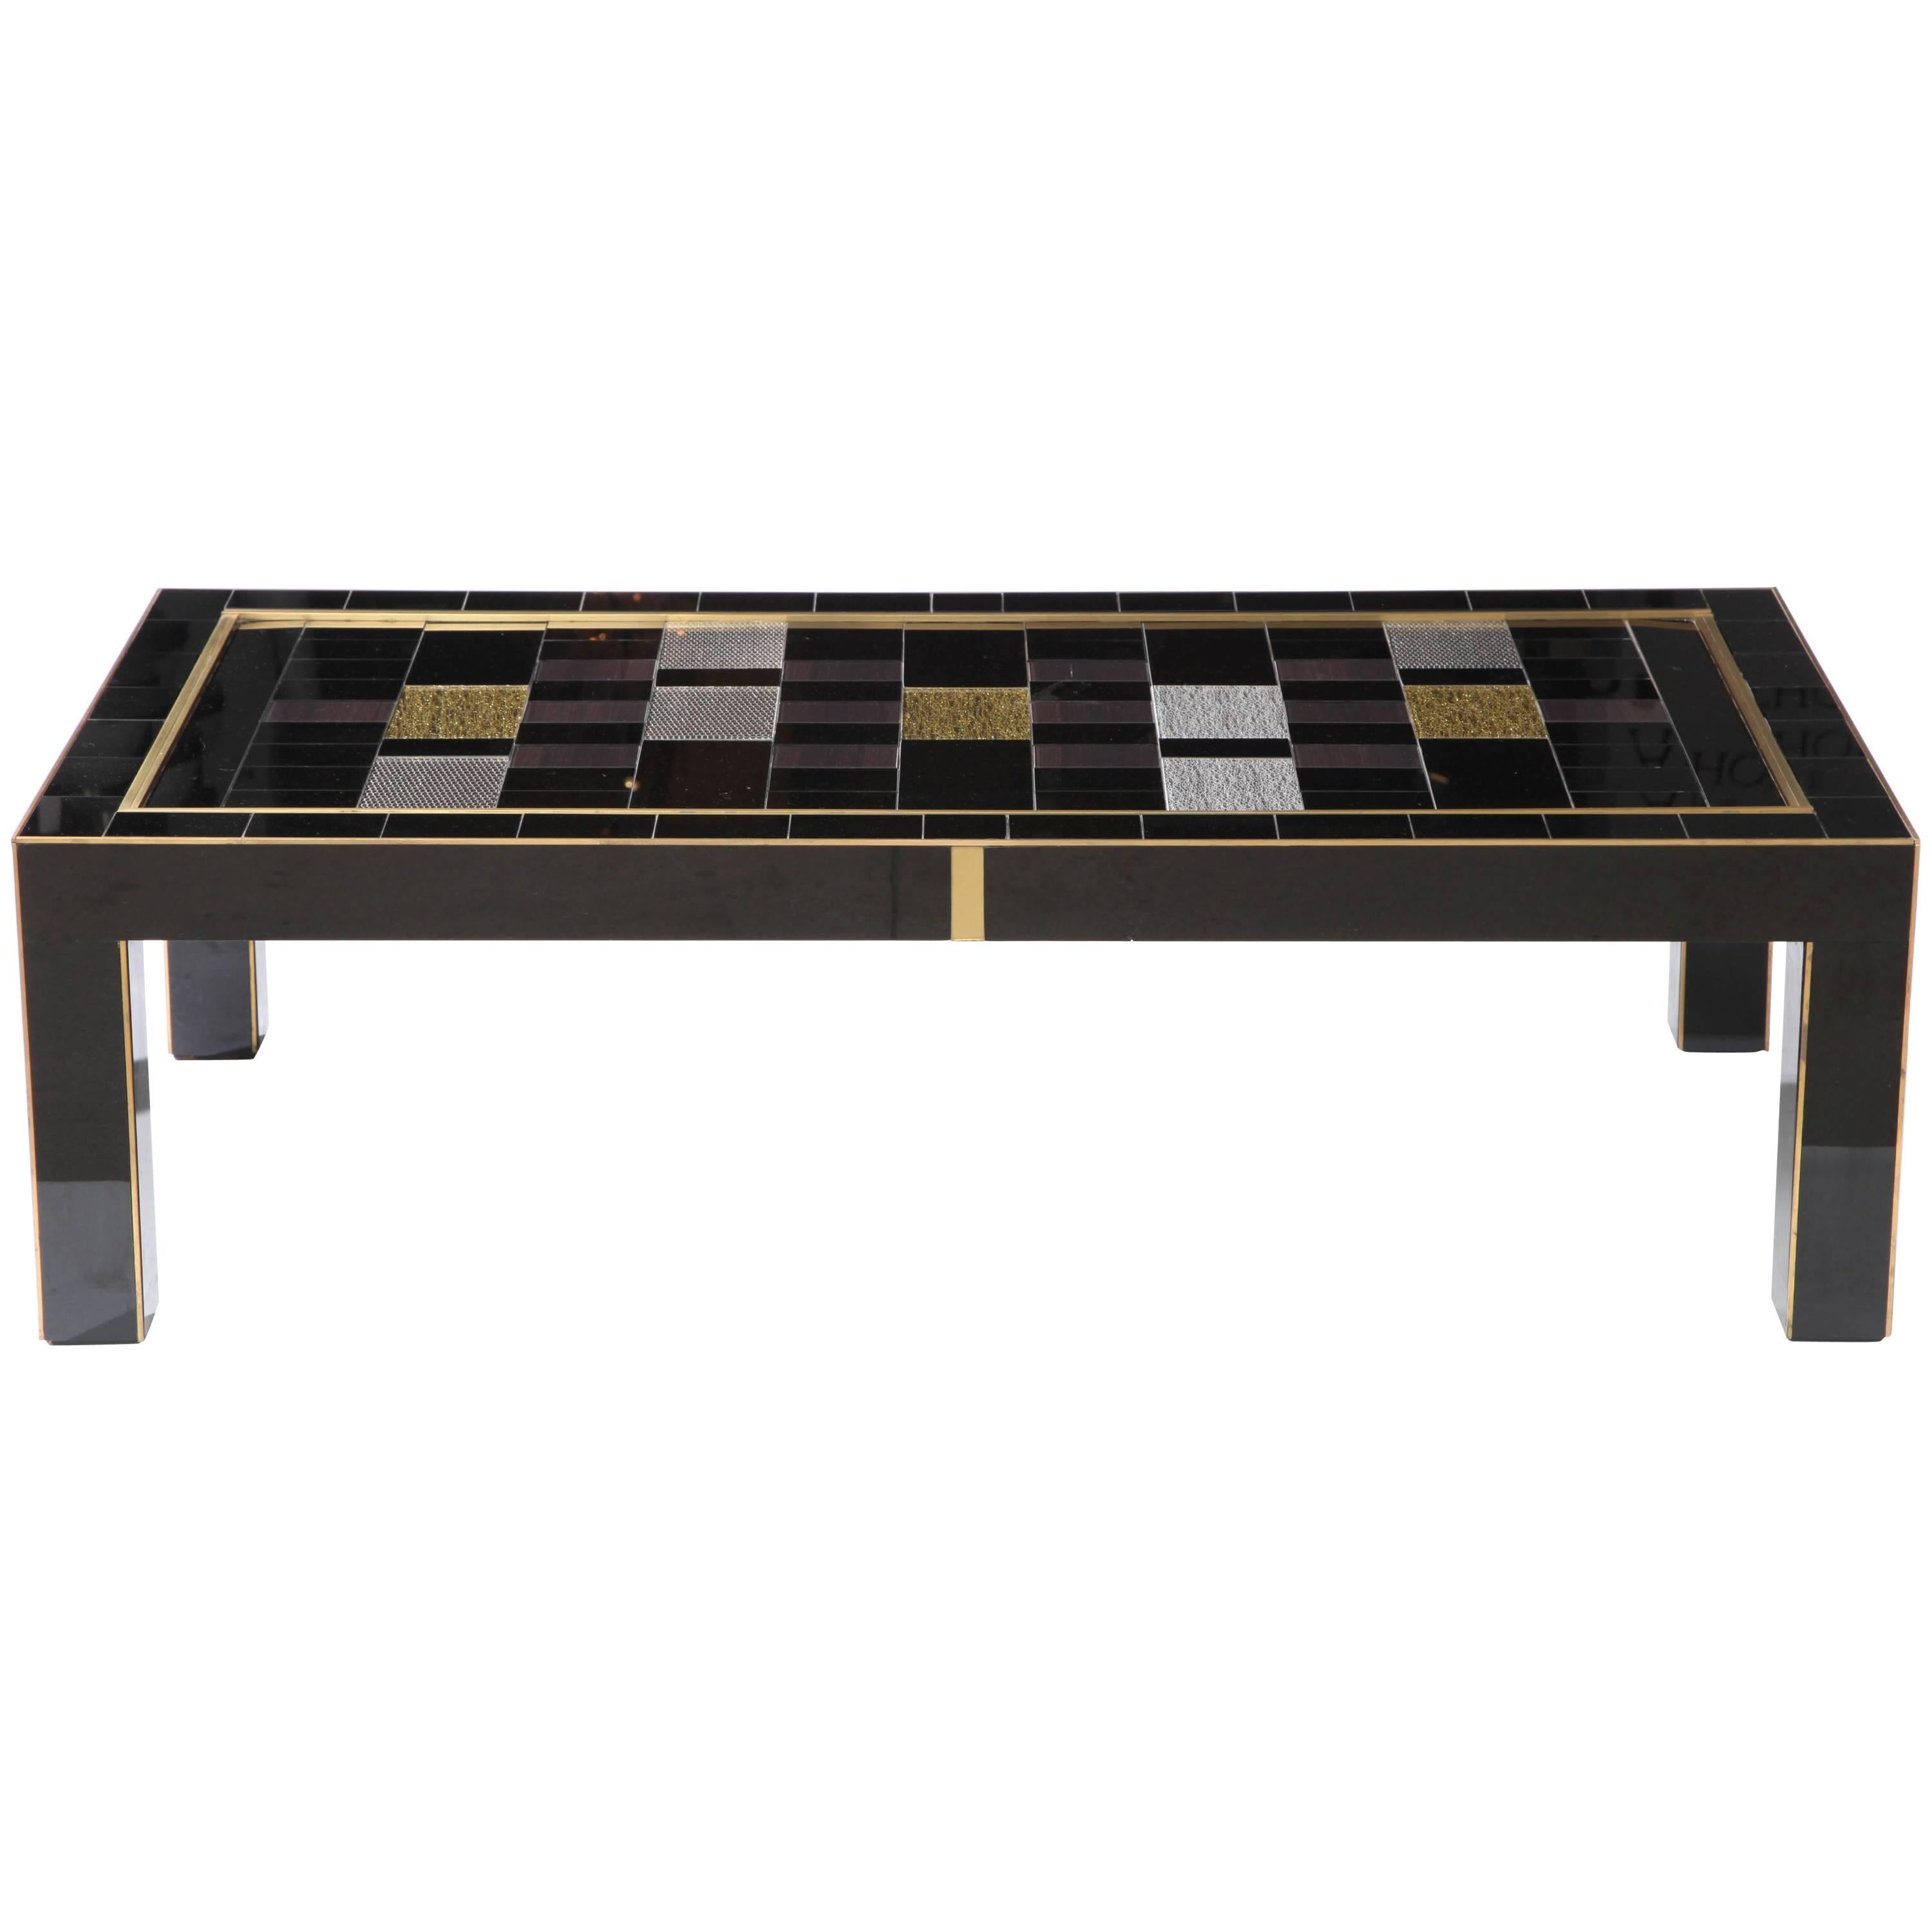 Custom Black, Silver and Gold Tinted Glass Coffee Table with Brass Inlays, Italy For Sale